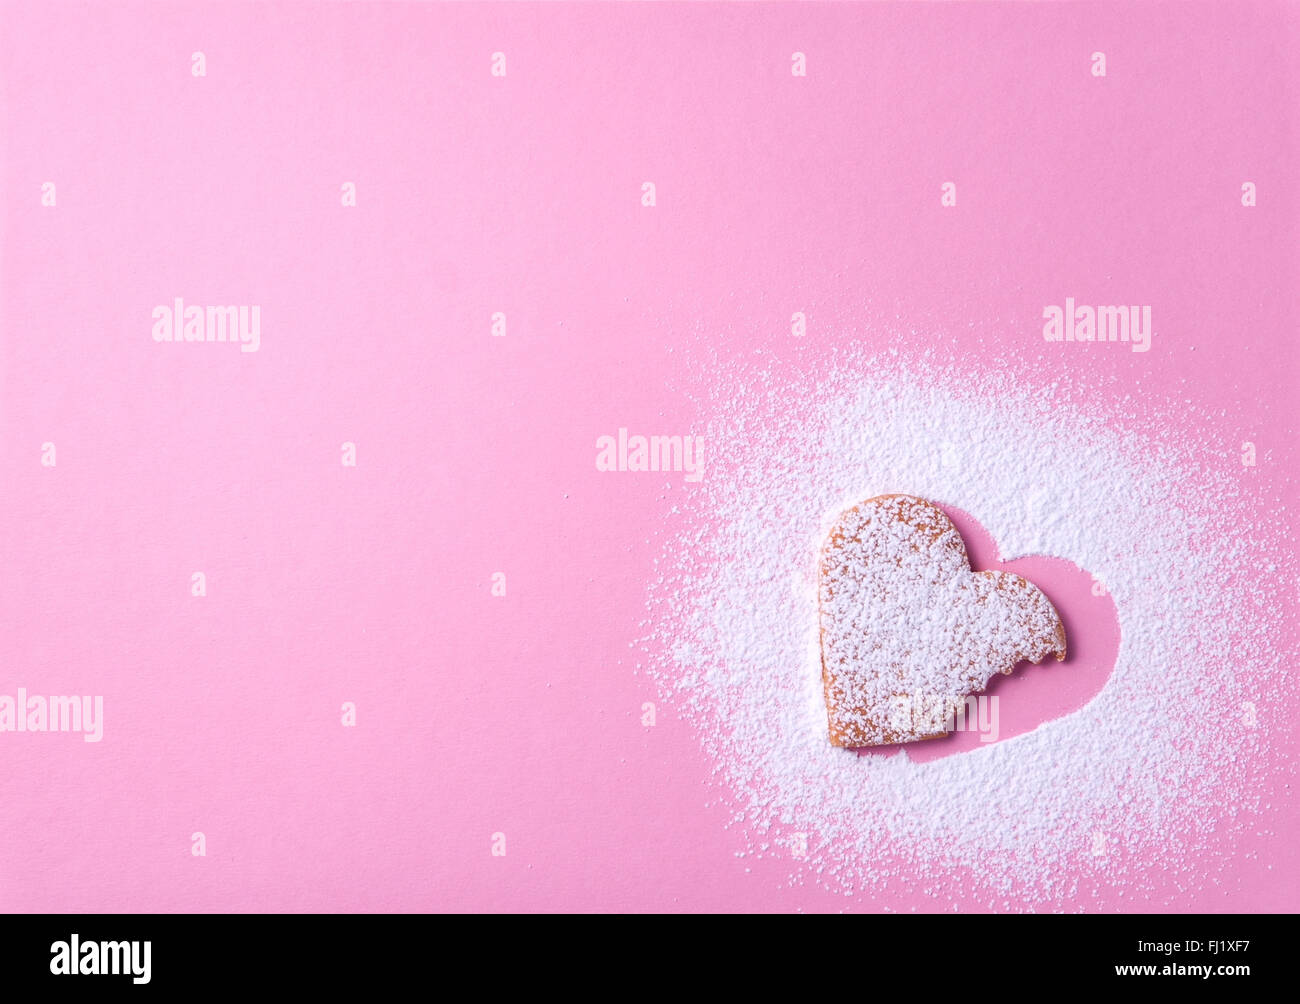 Heart shaped cookie with sugar icing on a pink paper background taken a bite from it Stock Photo